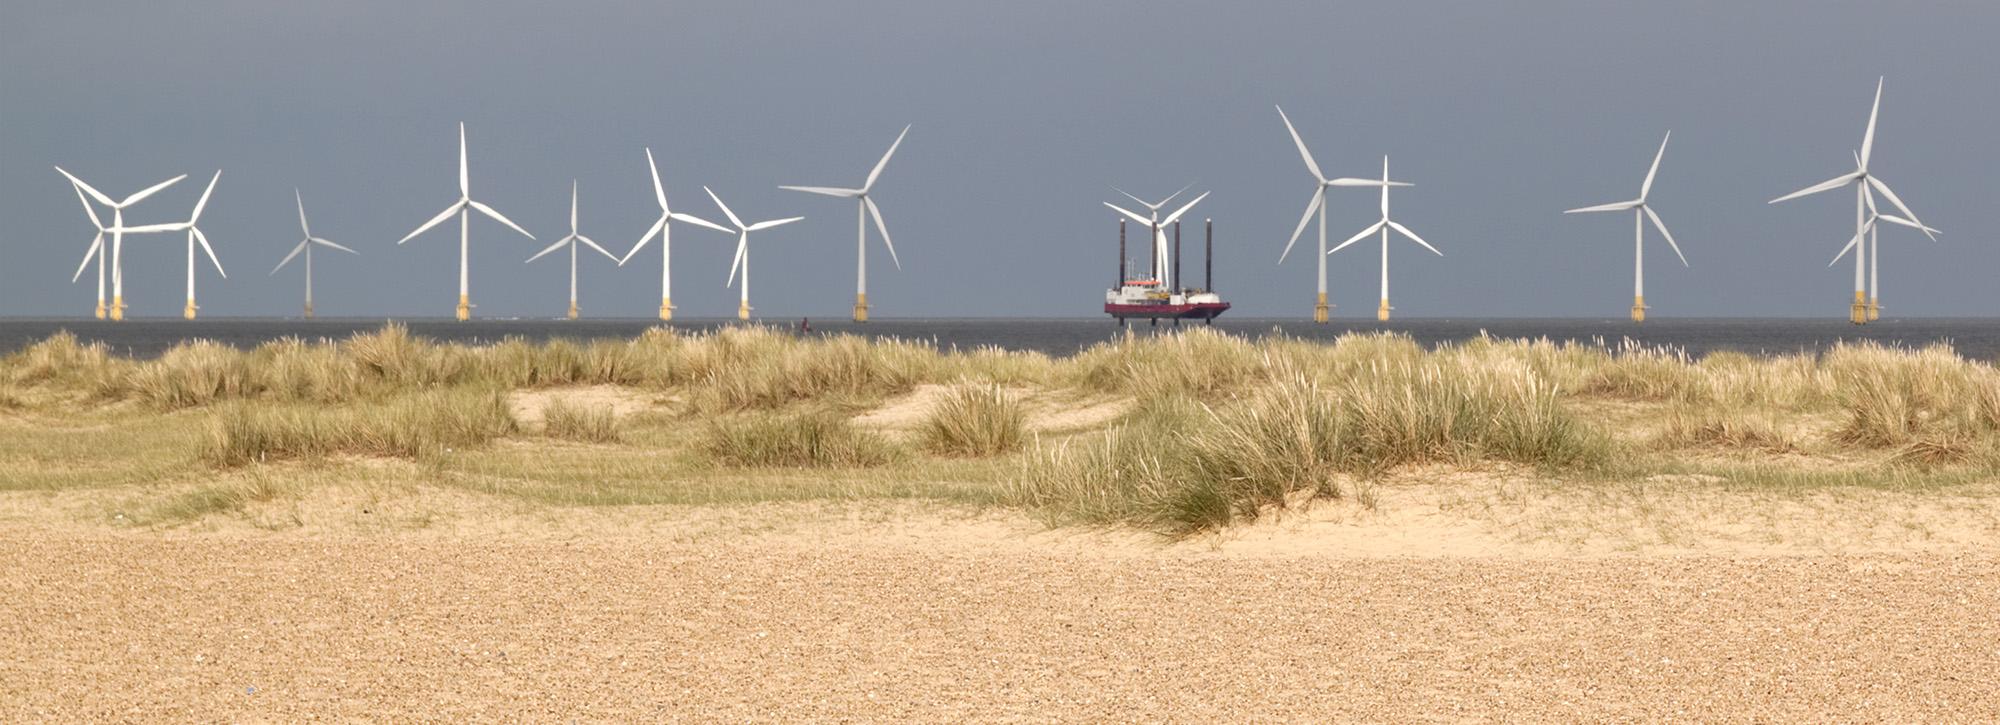 Panoramic view of a wind farm behind sand dunes